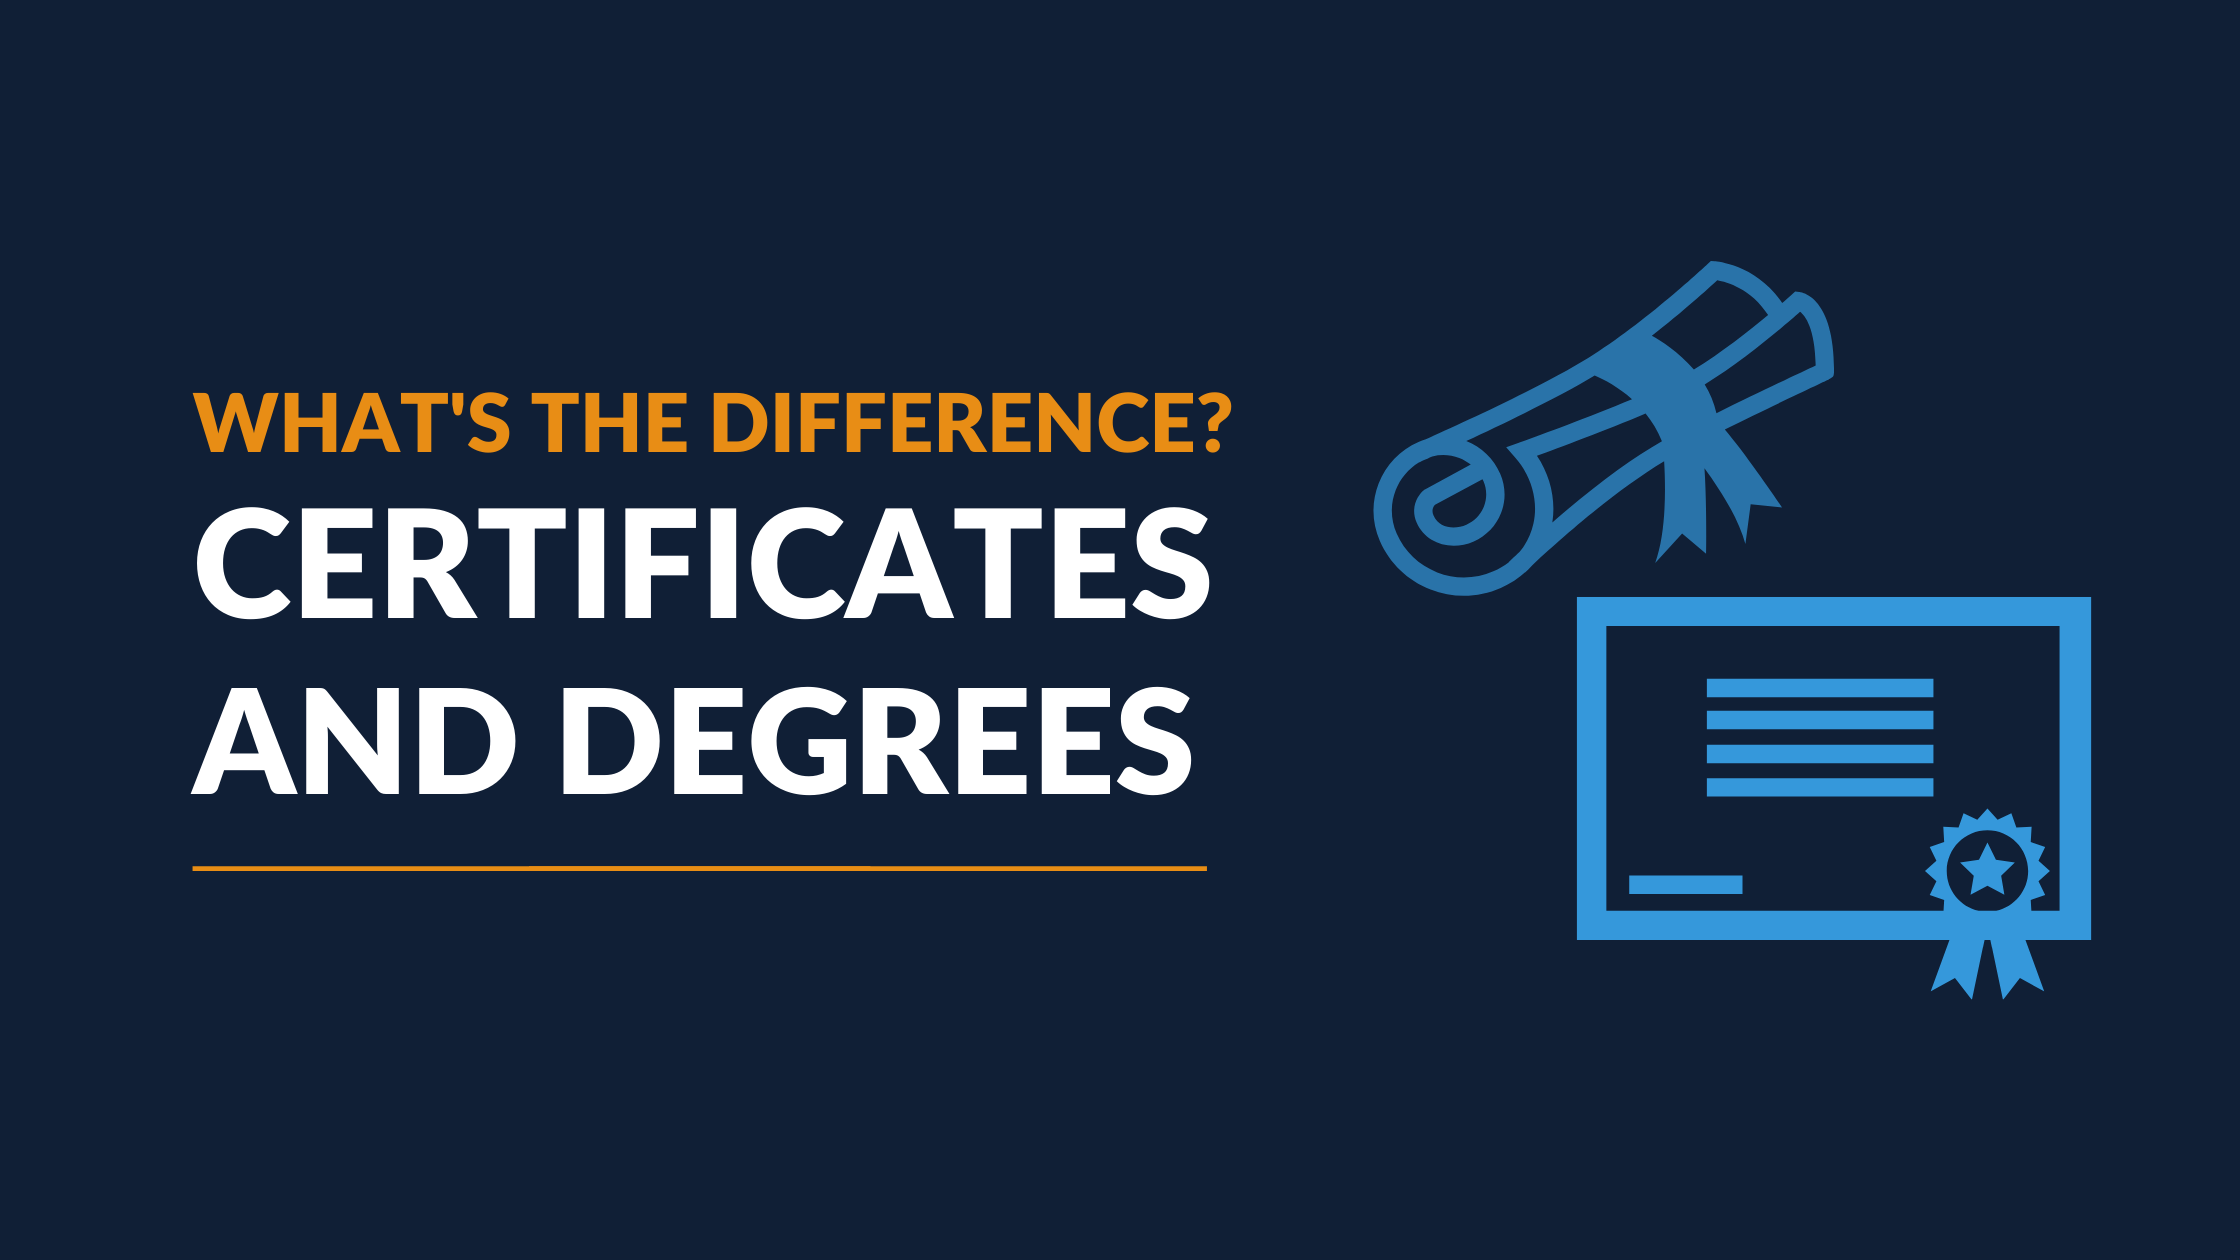 What’s the Difference Between a Certificate and Degree?